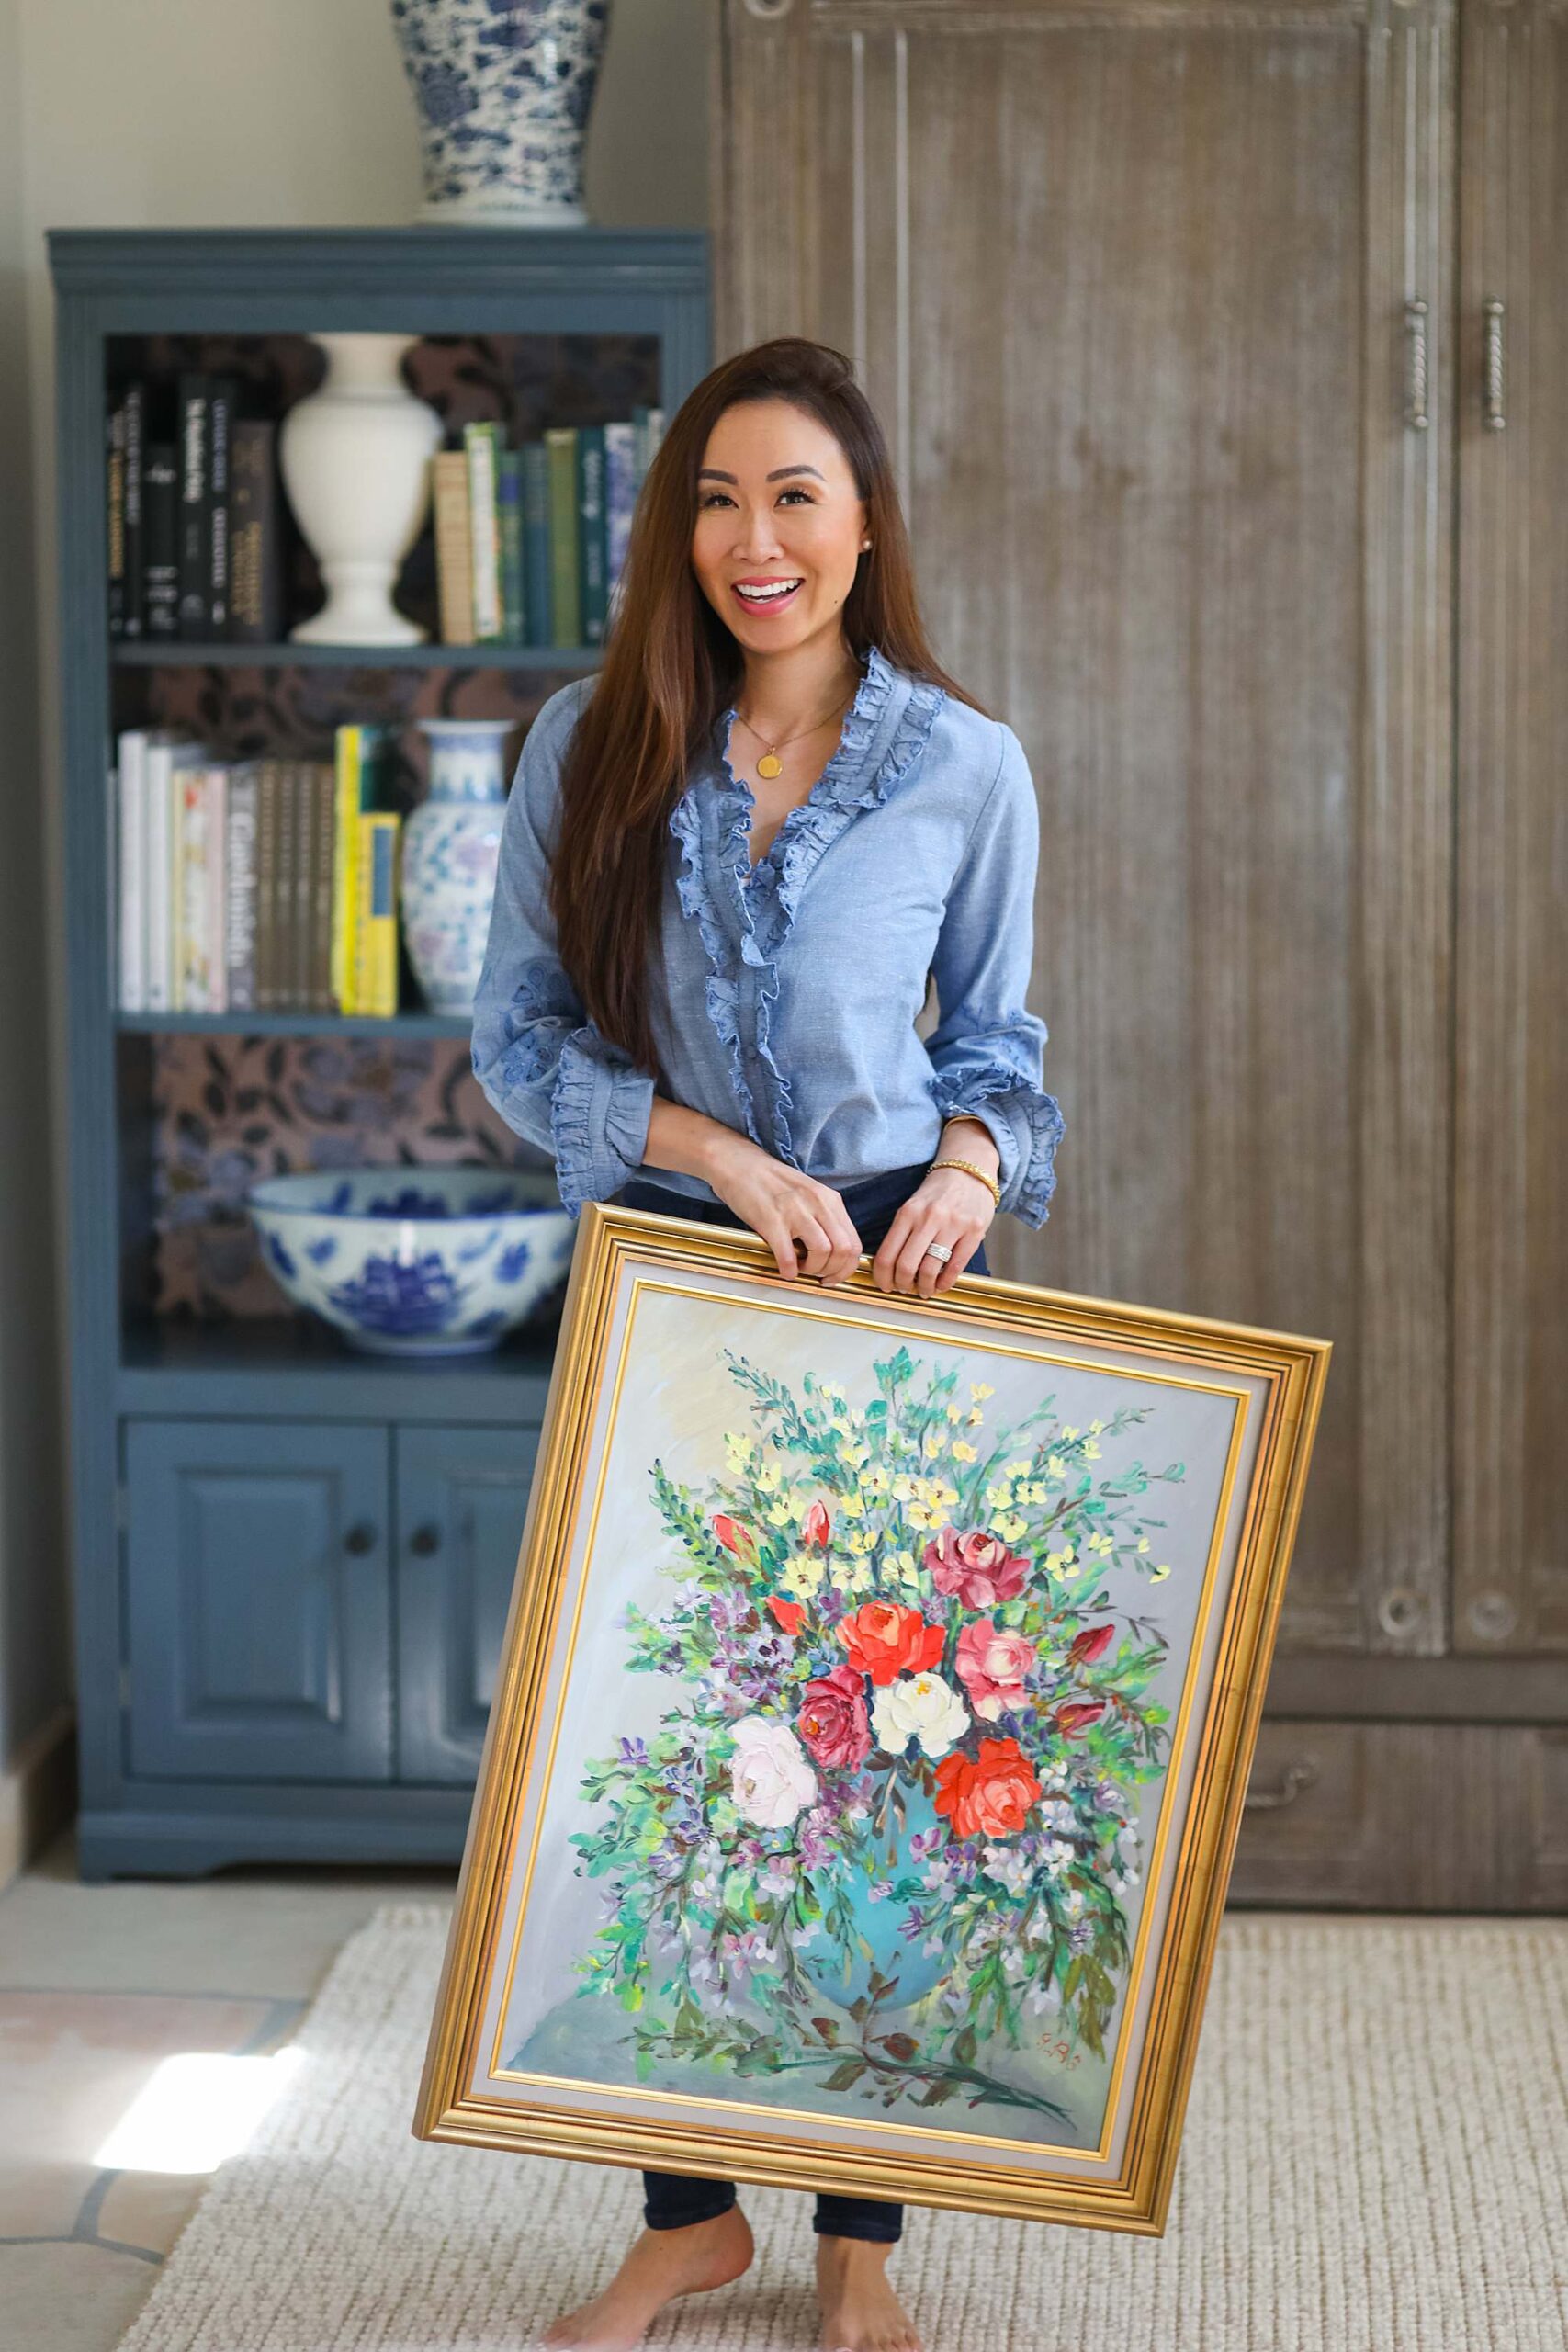 antiquing, thrifting, and buying new like at home goods, what do I like to buy and where // holding antique floral oil on canvas painting - home and lifestyle blogger